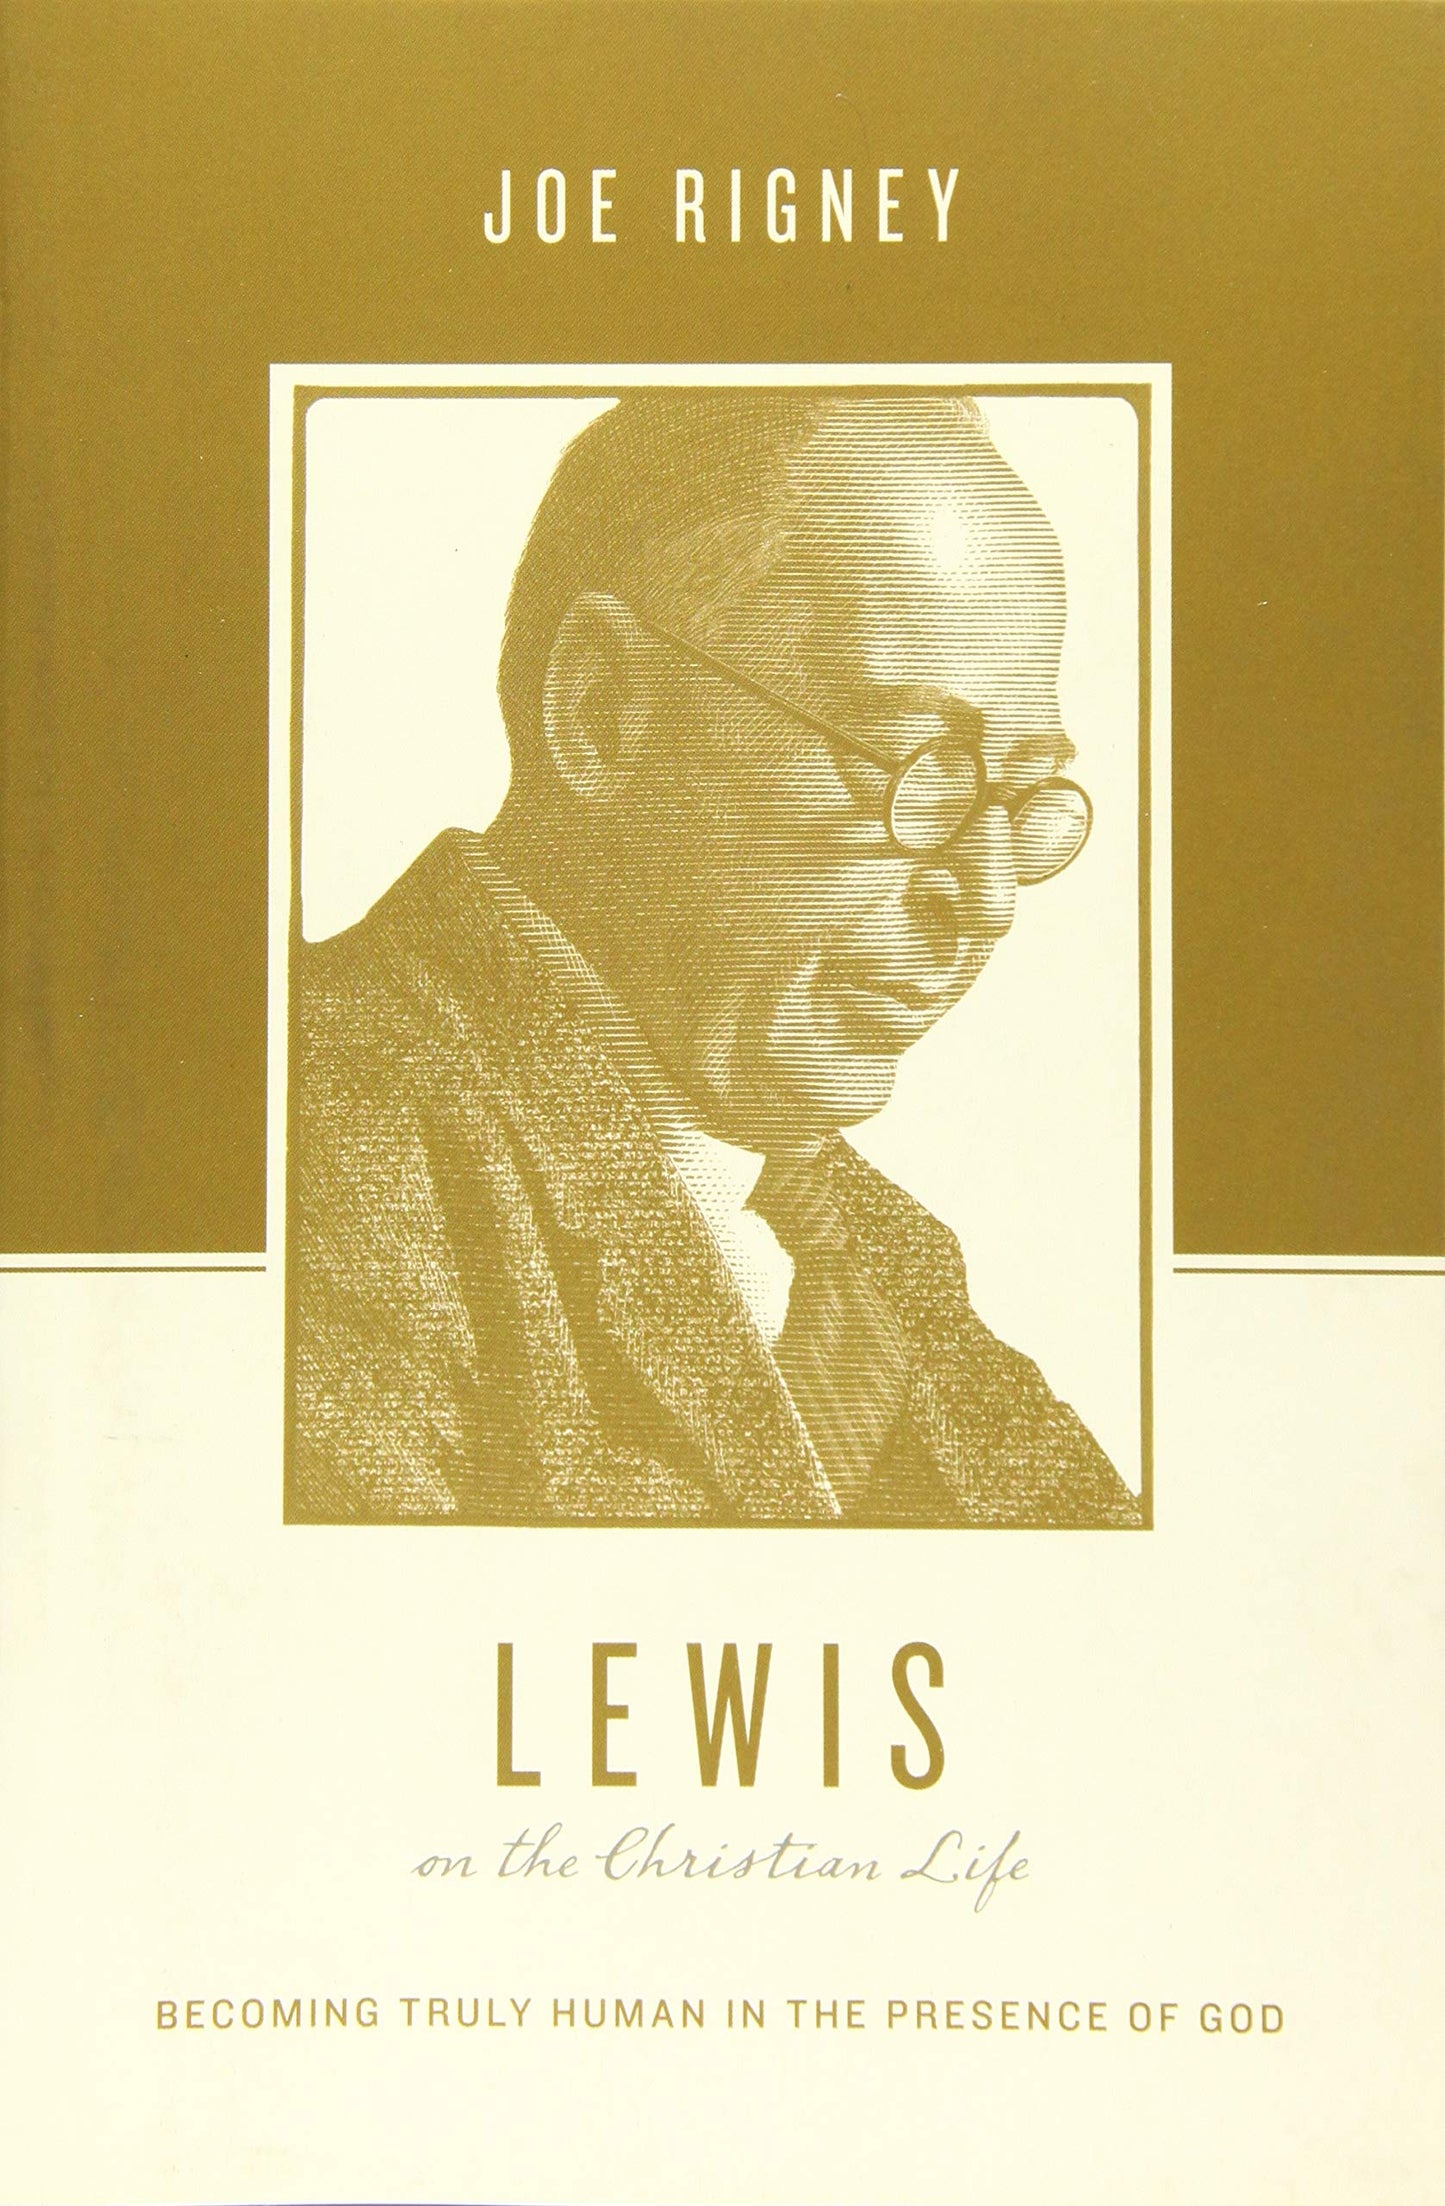 Lewis on the Christian Life (Rigney)